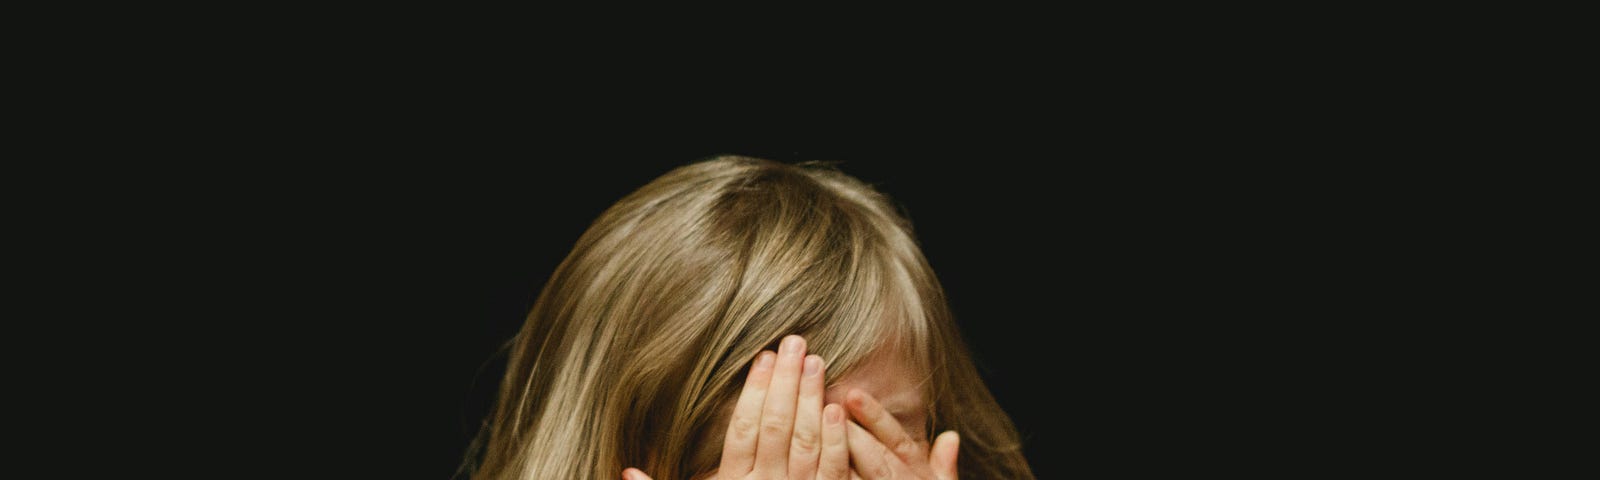 Blonde haired child covering her face with her hands